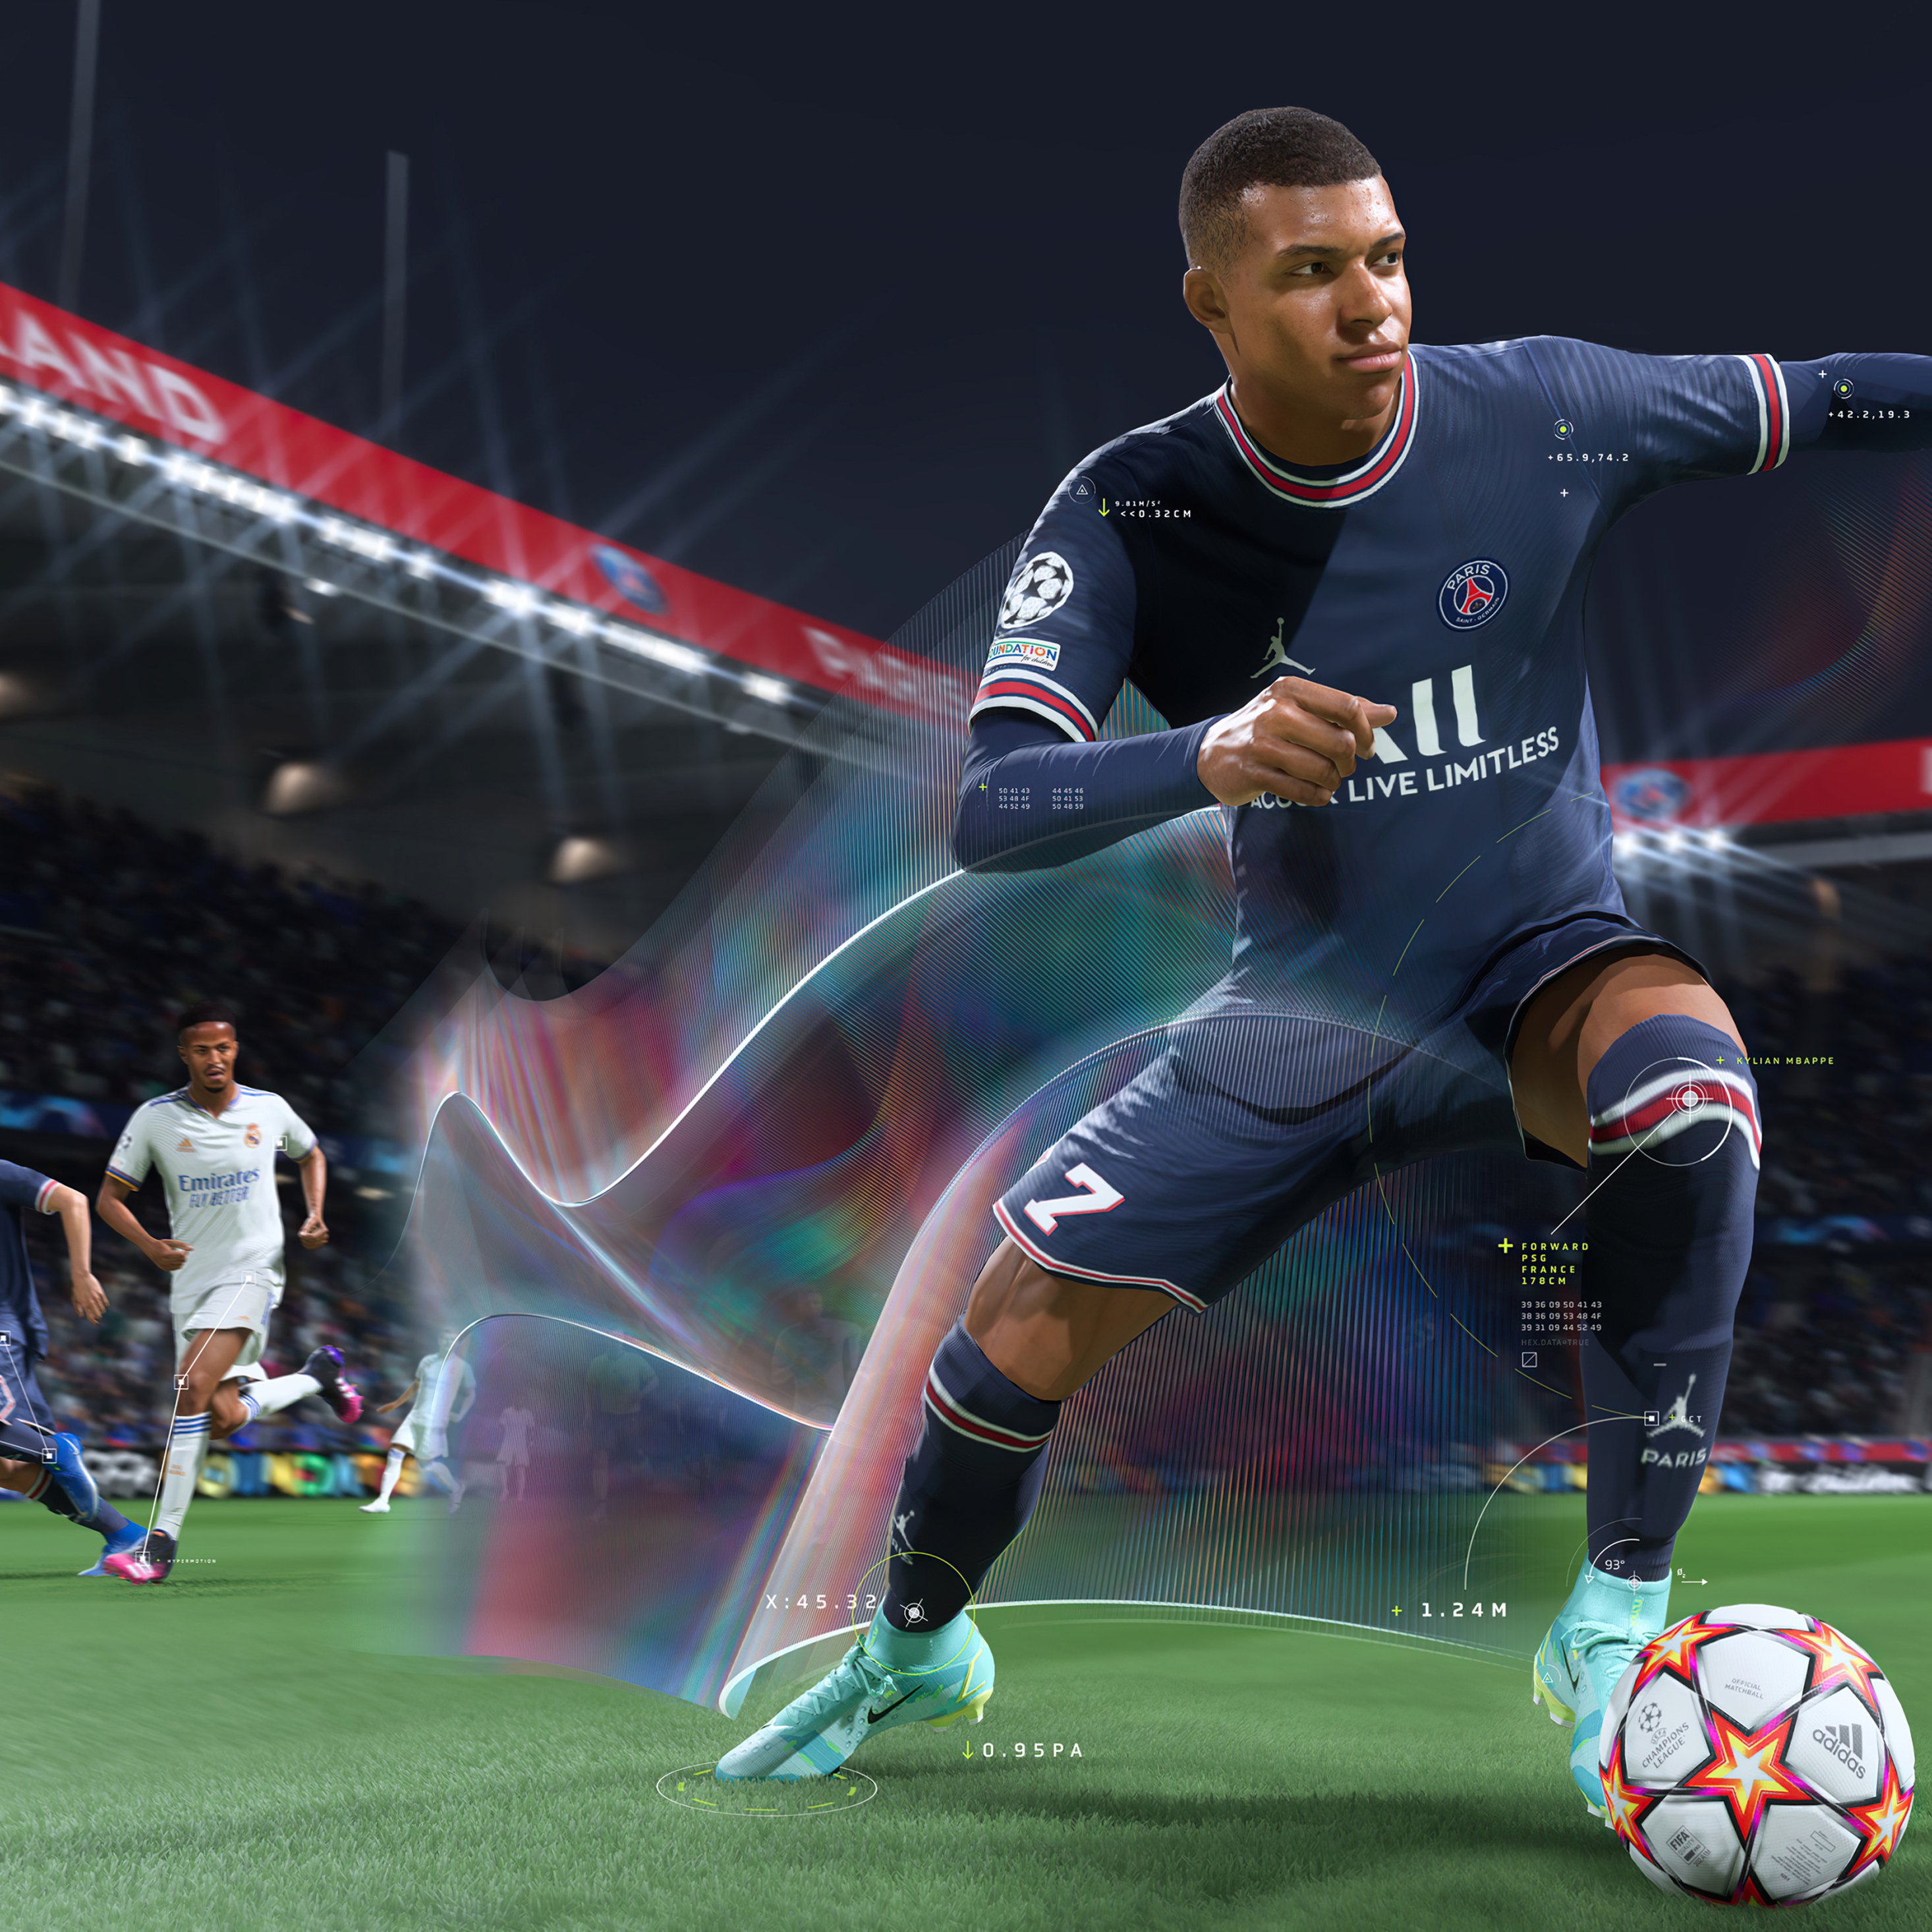 Kylian Mbappe In Fifa 2022 iPad Pro Retina Display HD 4k Wallpaper, Image, Background, Photo and Picture